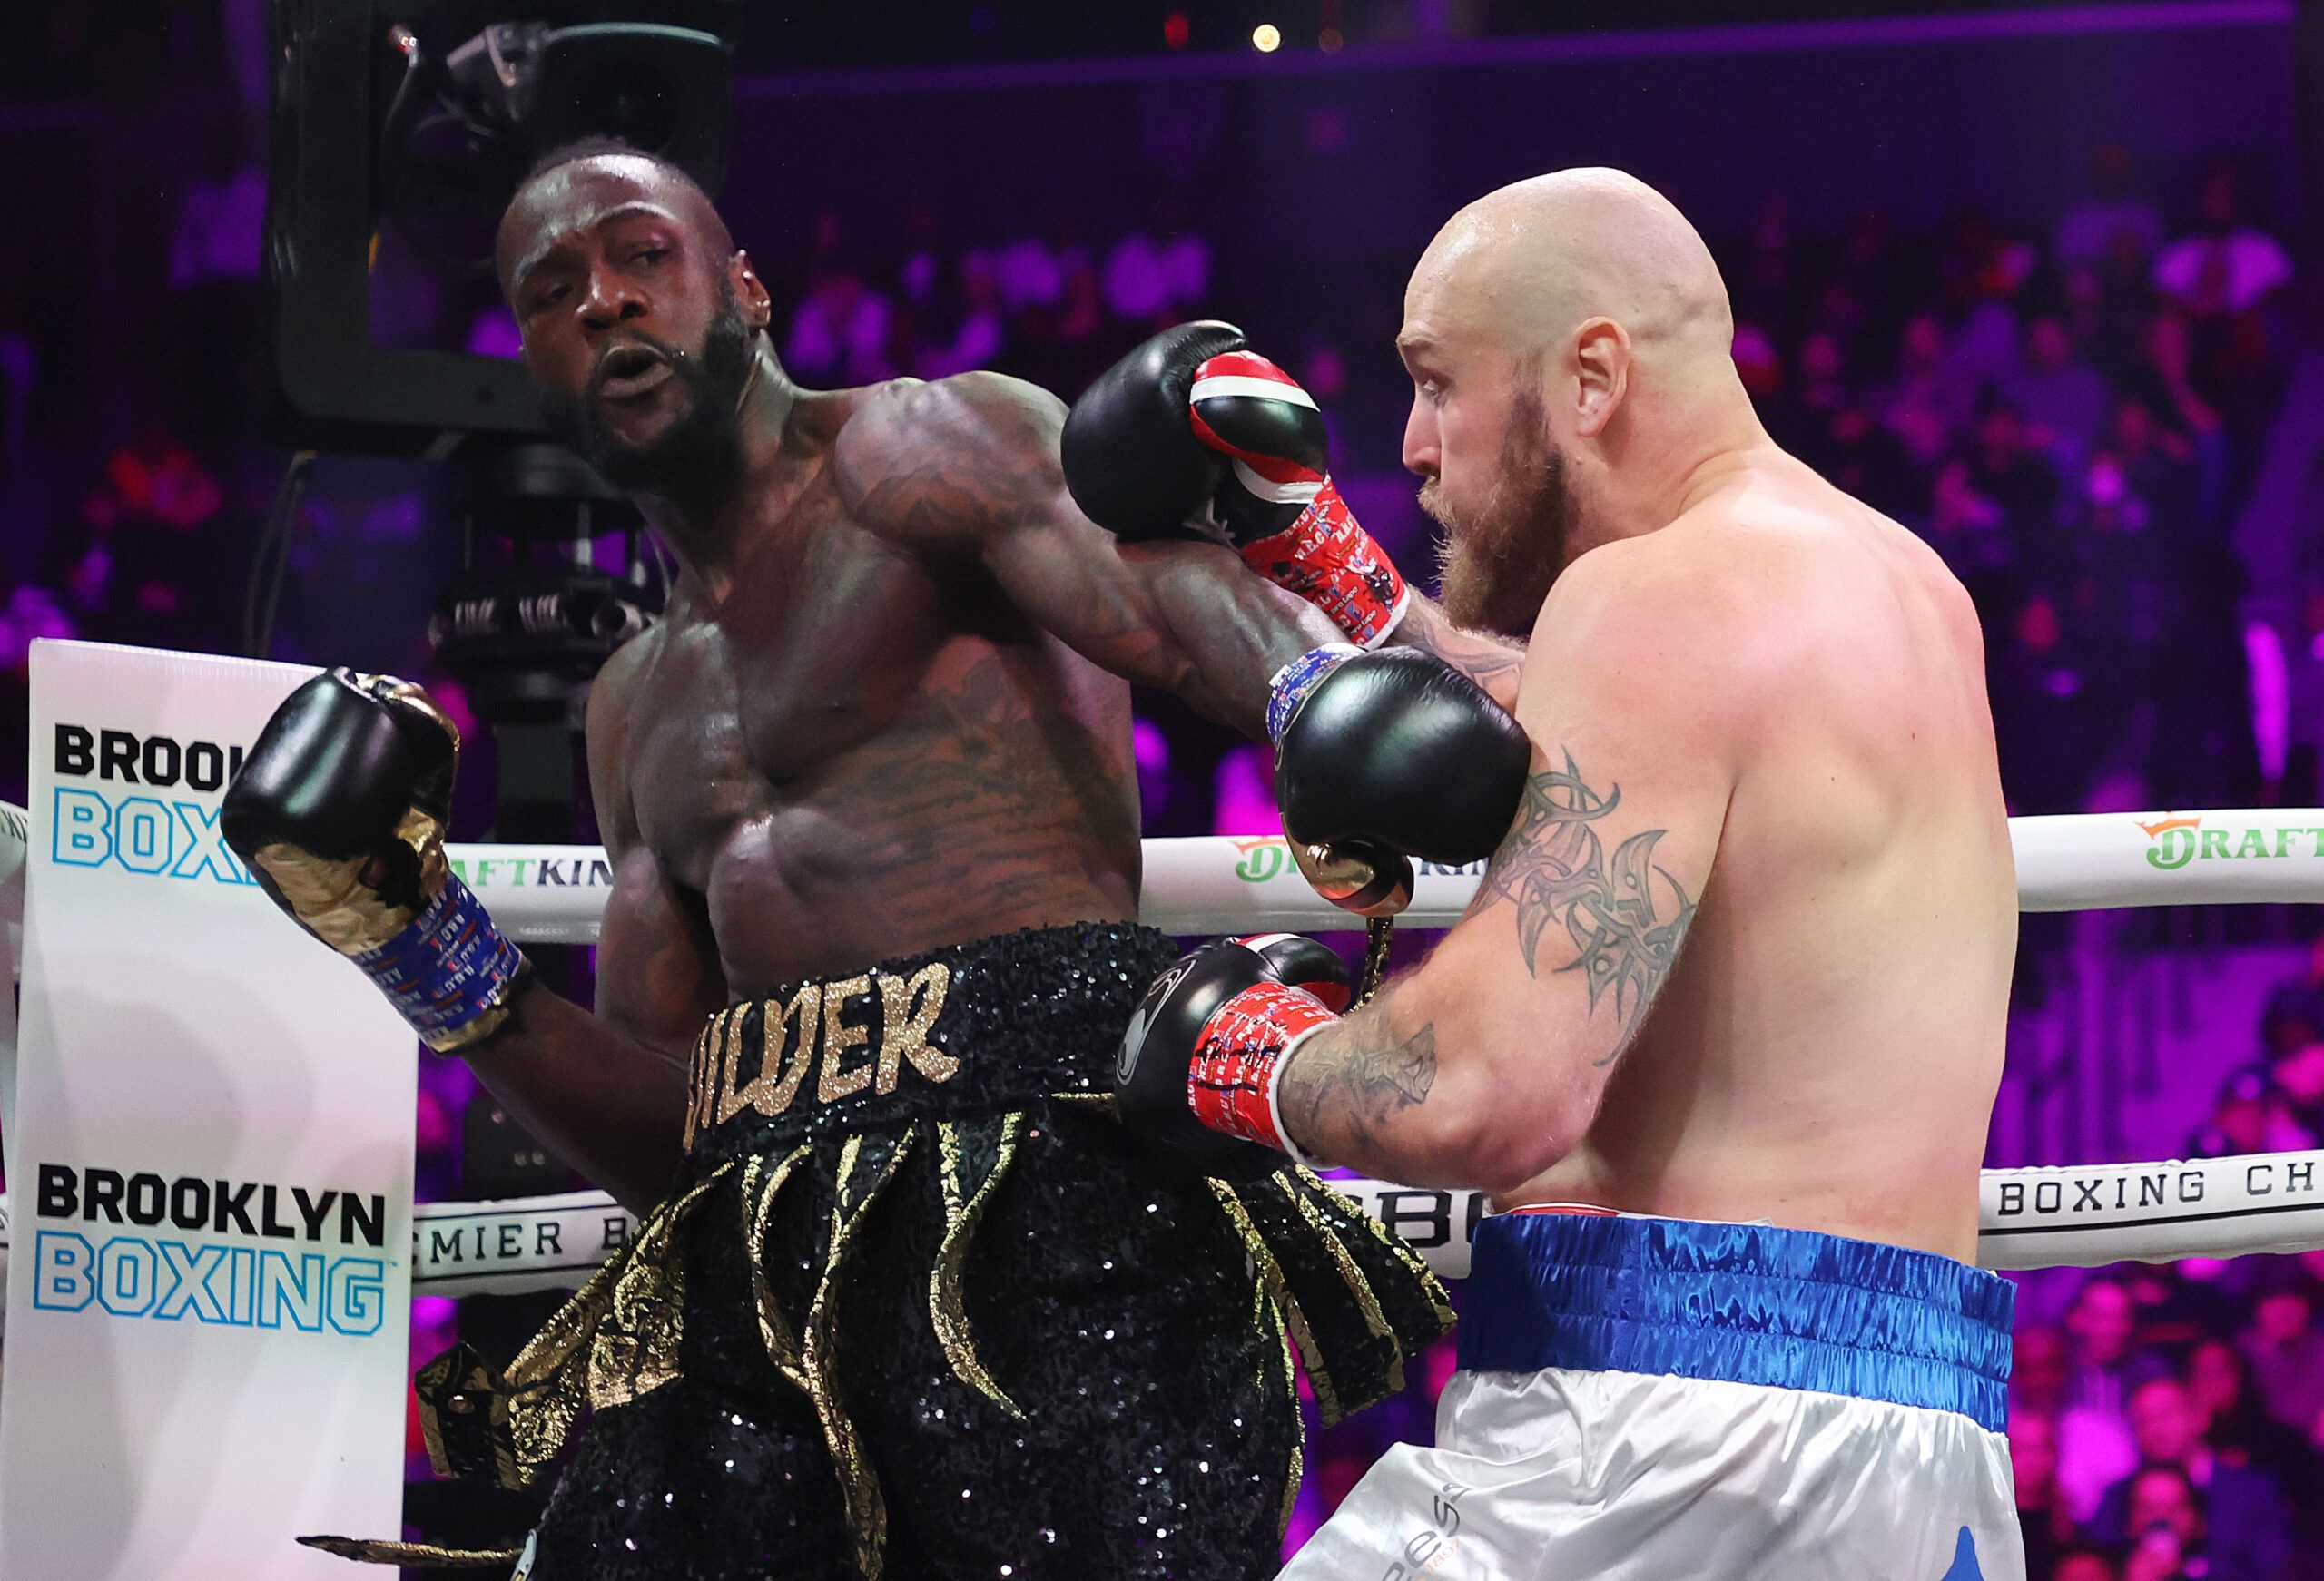 Deontay Wilder: Robert Helenius' face after being knocked out by Bronze Bomber